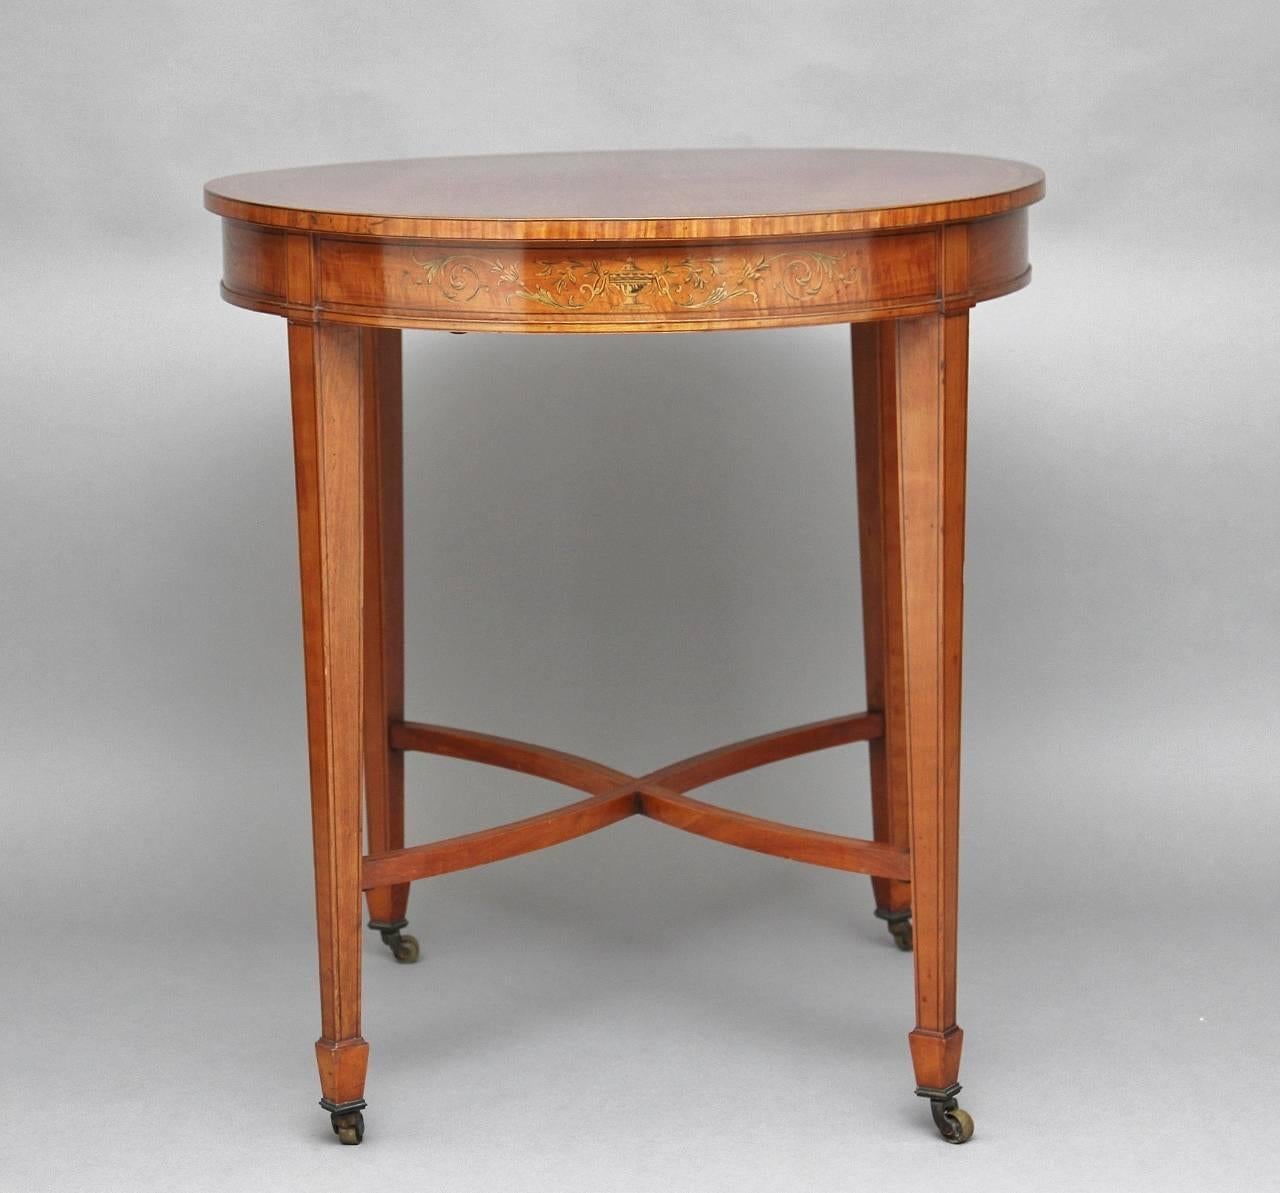 19th century inlaid satinwood centre / occasional table, with an oval shaped top, the apron below profusely inlaid all over, standing on tapering legs with spade feet and brass castors united with a cross stretcher, circa 1890.